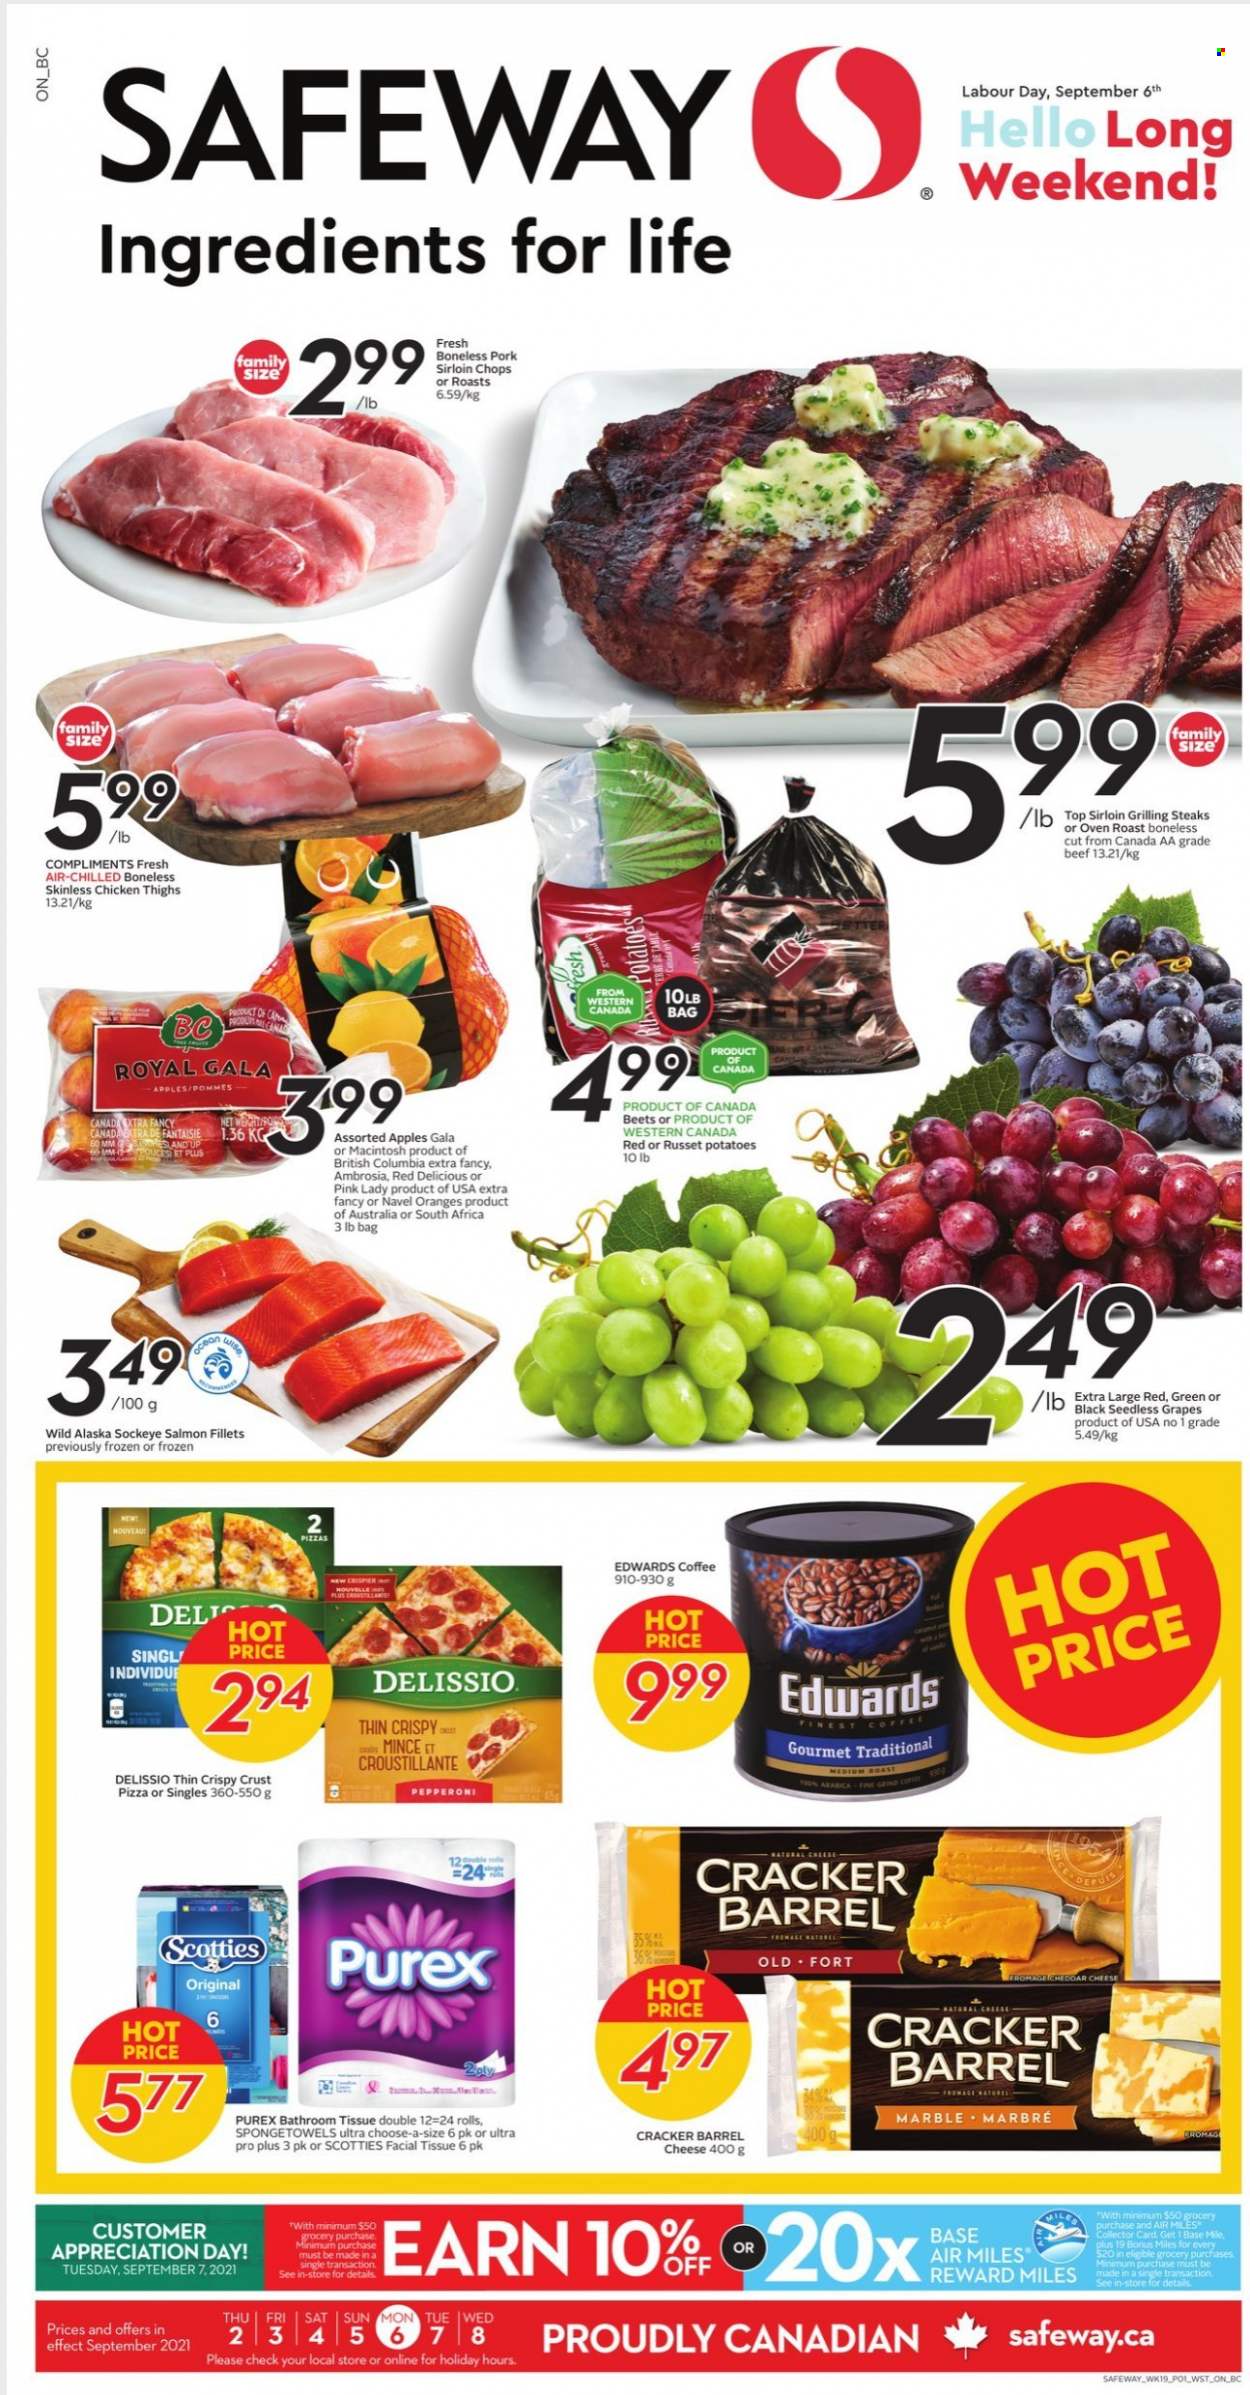 thumbnail - Safeway Flyer - September 02, 2021 - September 06, 2021 - Sales products - russet potatoes, potatoes, apples, Gala, grapes, Red Delicious apples, seedless grapes, Pink Lady, navel oranges, salmon, salmon fillet, pizza, pepperoni, crackers, coffee, chicken thighs, chicken, pork loin, bath tissue, XTRA, Purex, steak, oranges. Page 1.